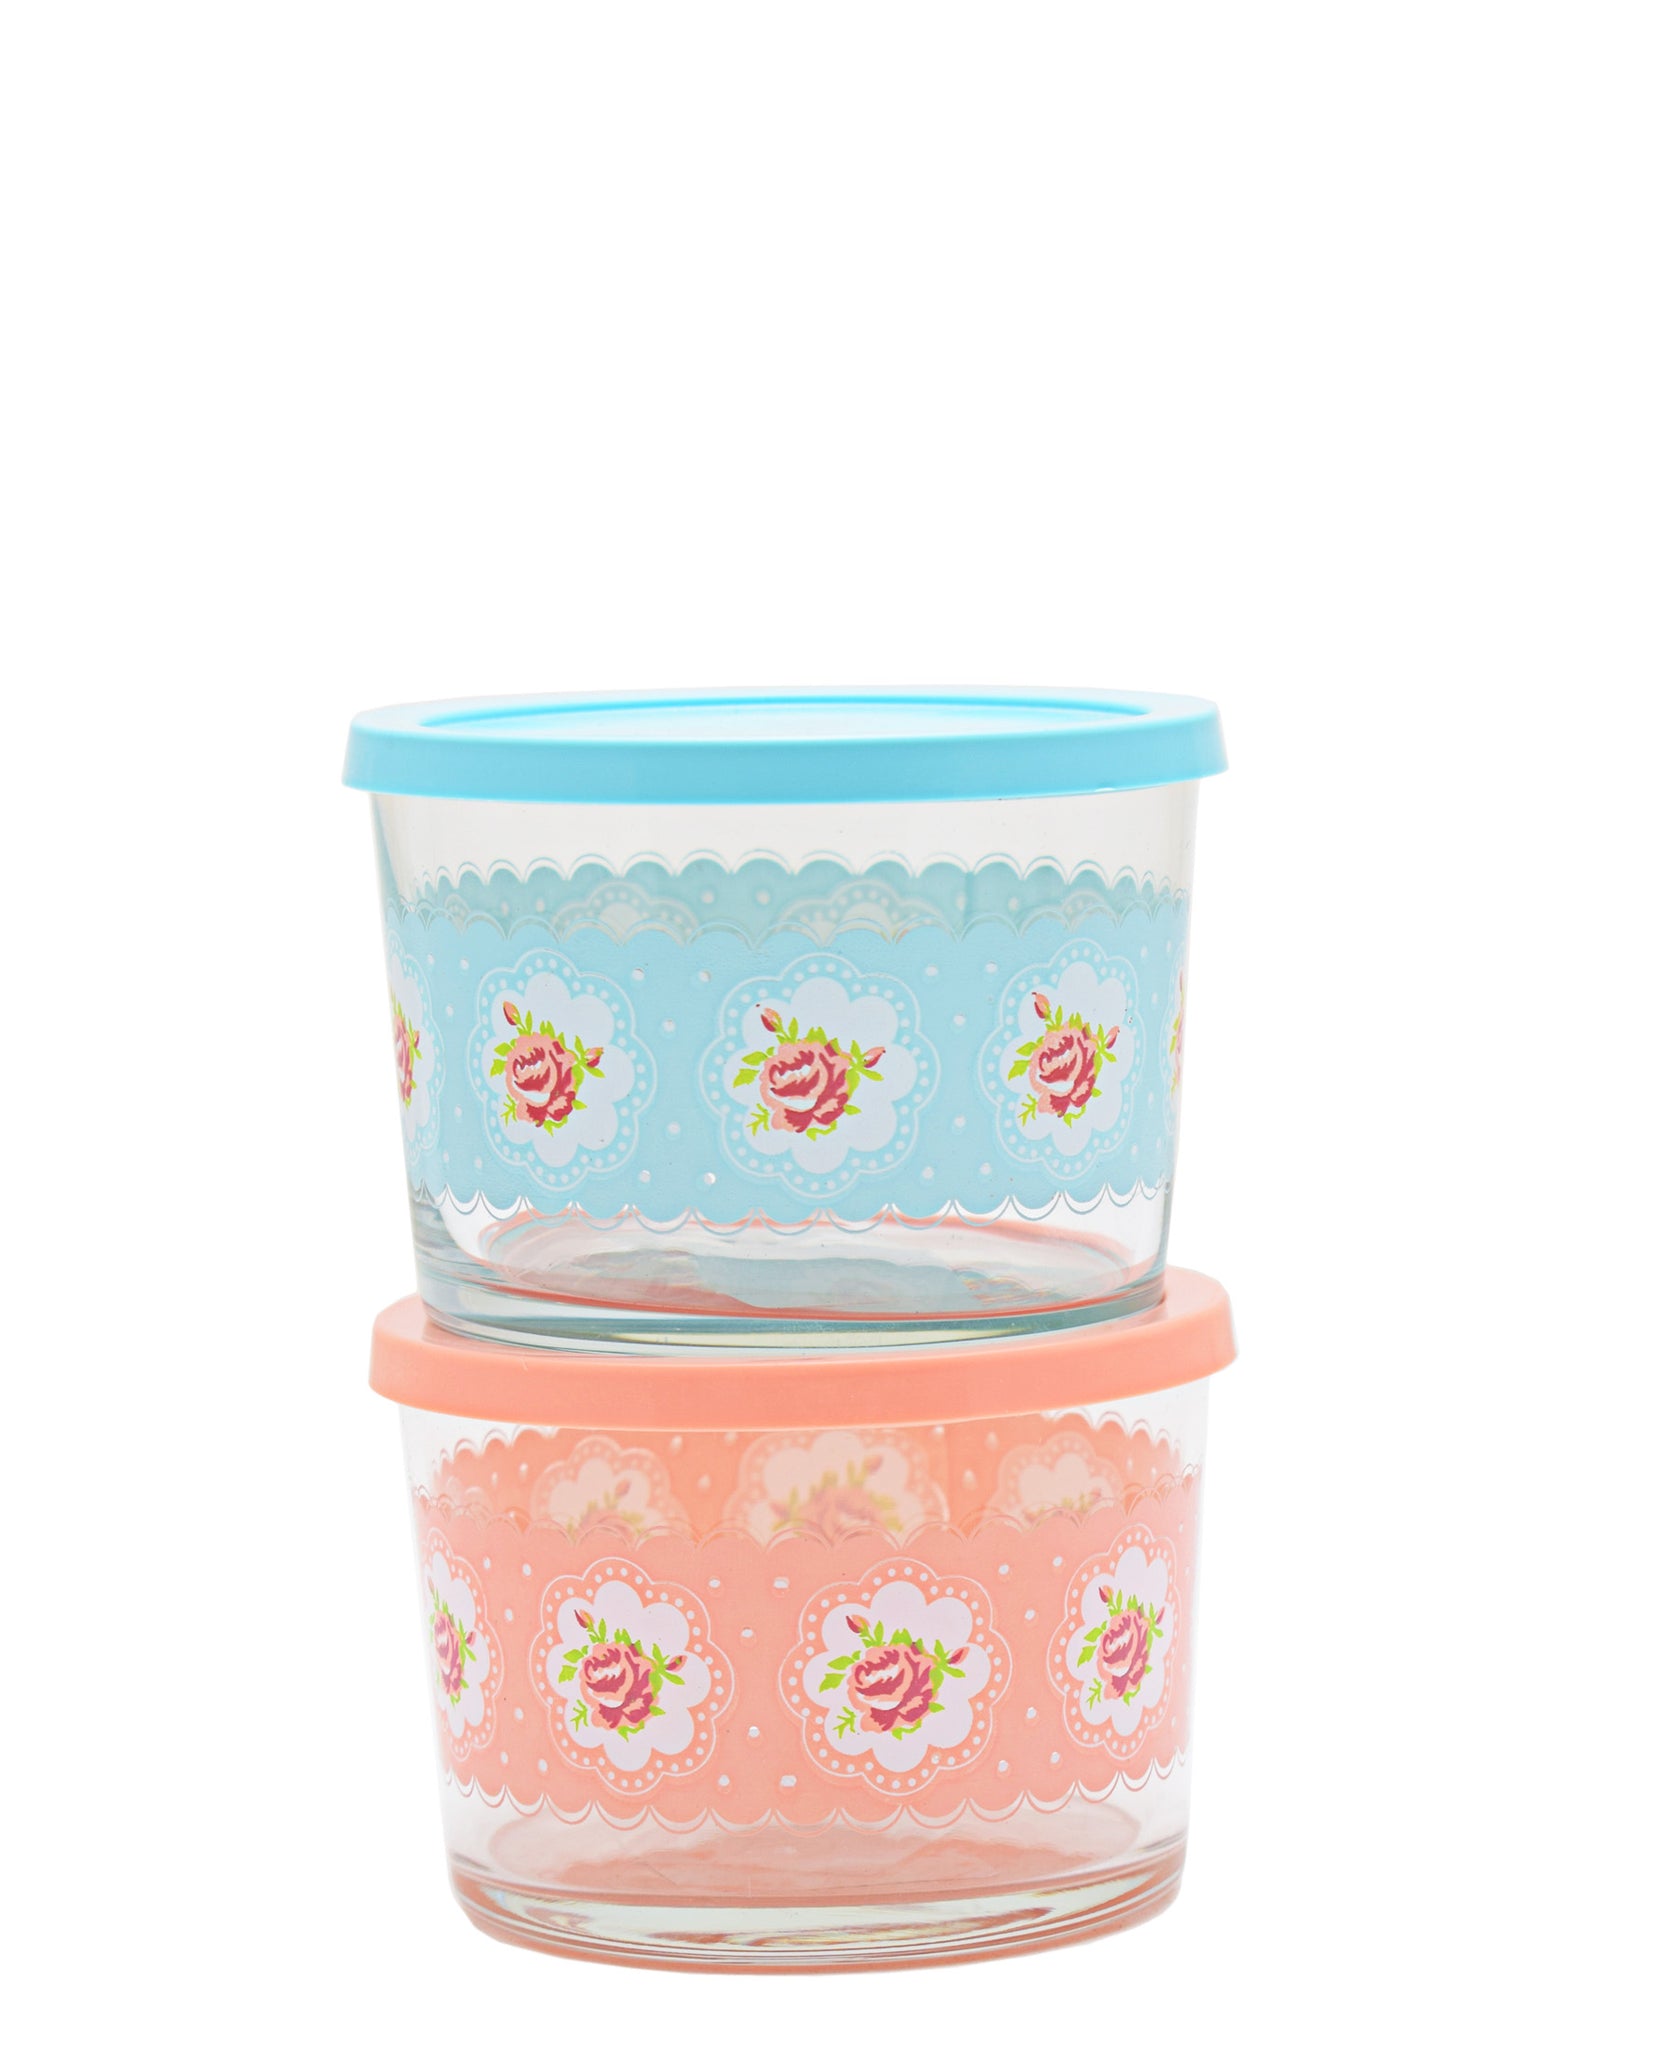 LAV 240ml 2 Piece Bowl With Lid - Pink & Blue